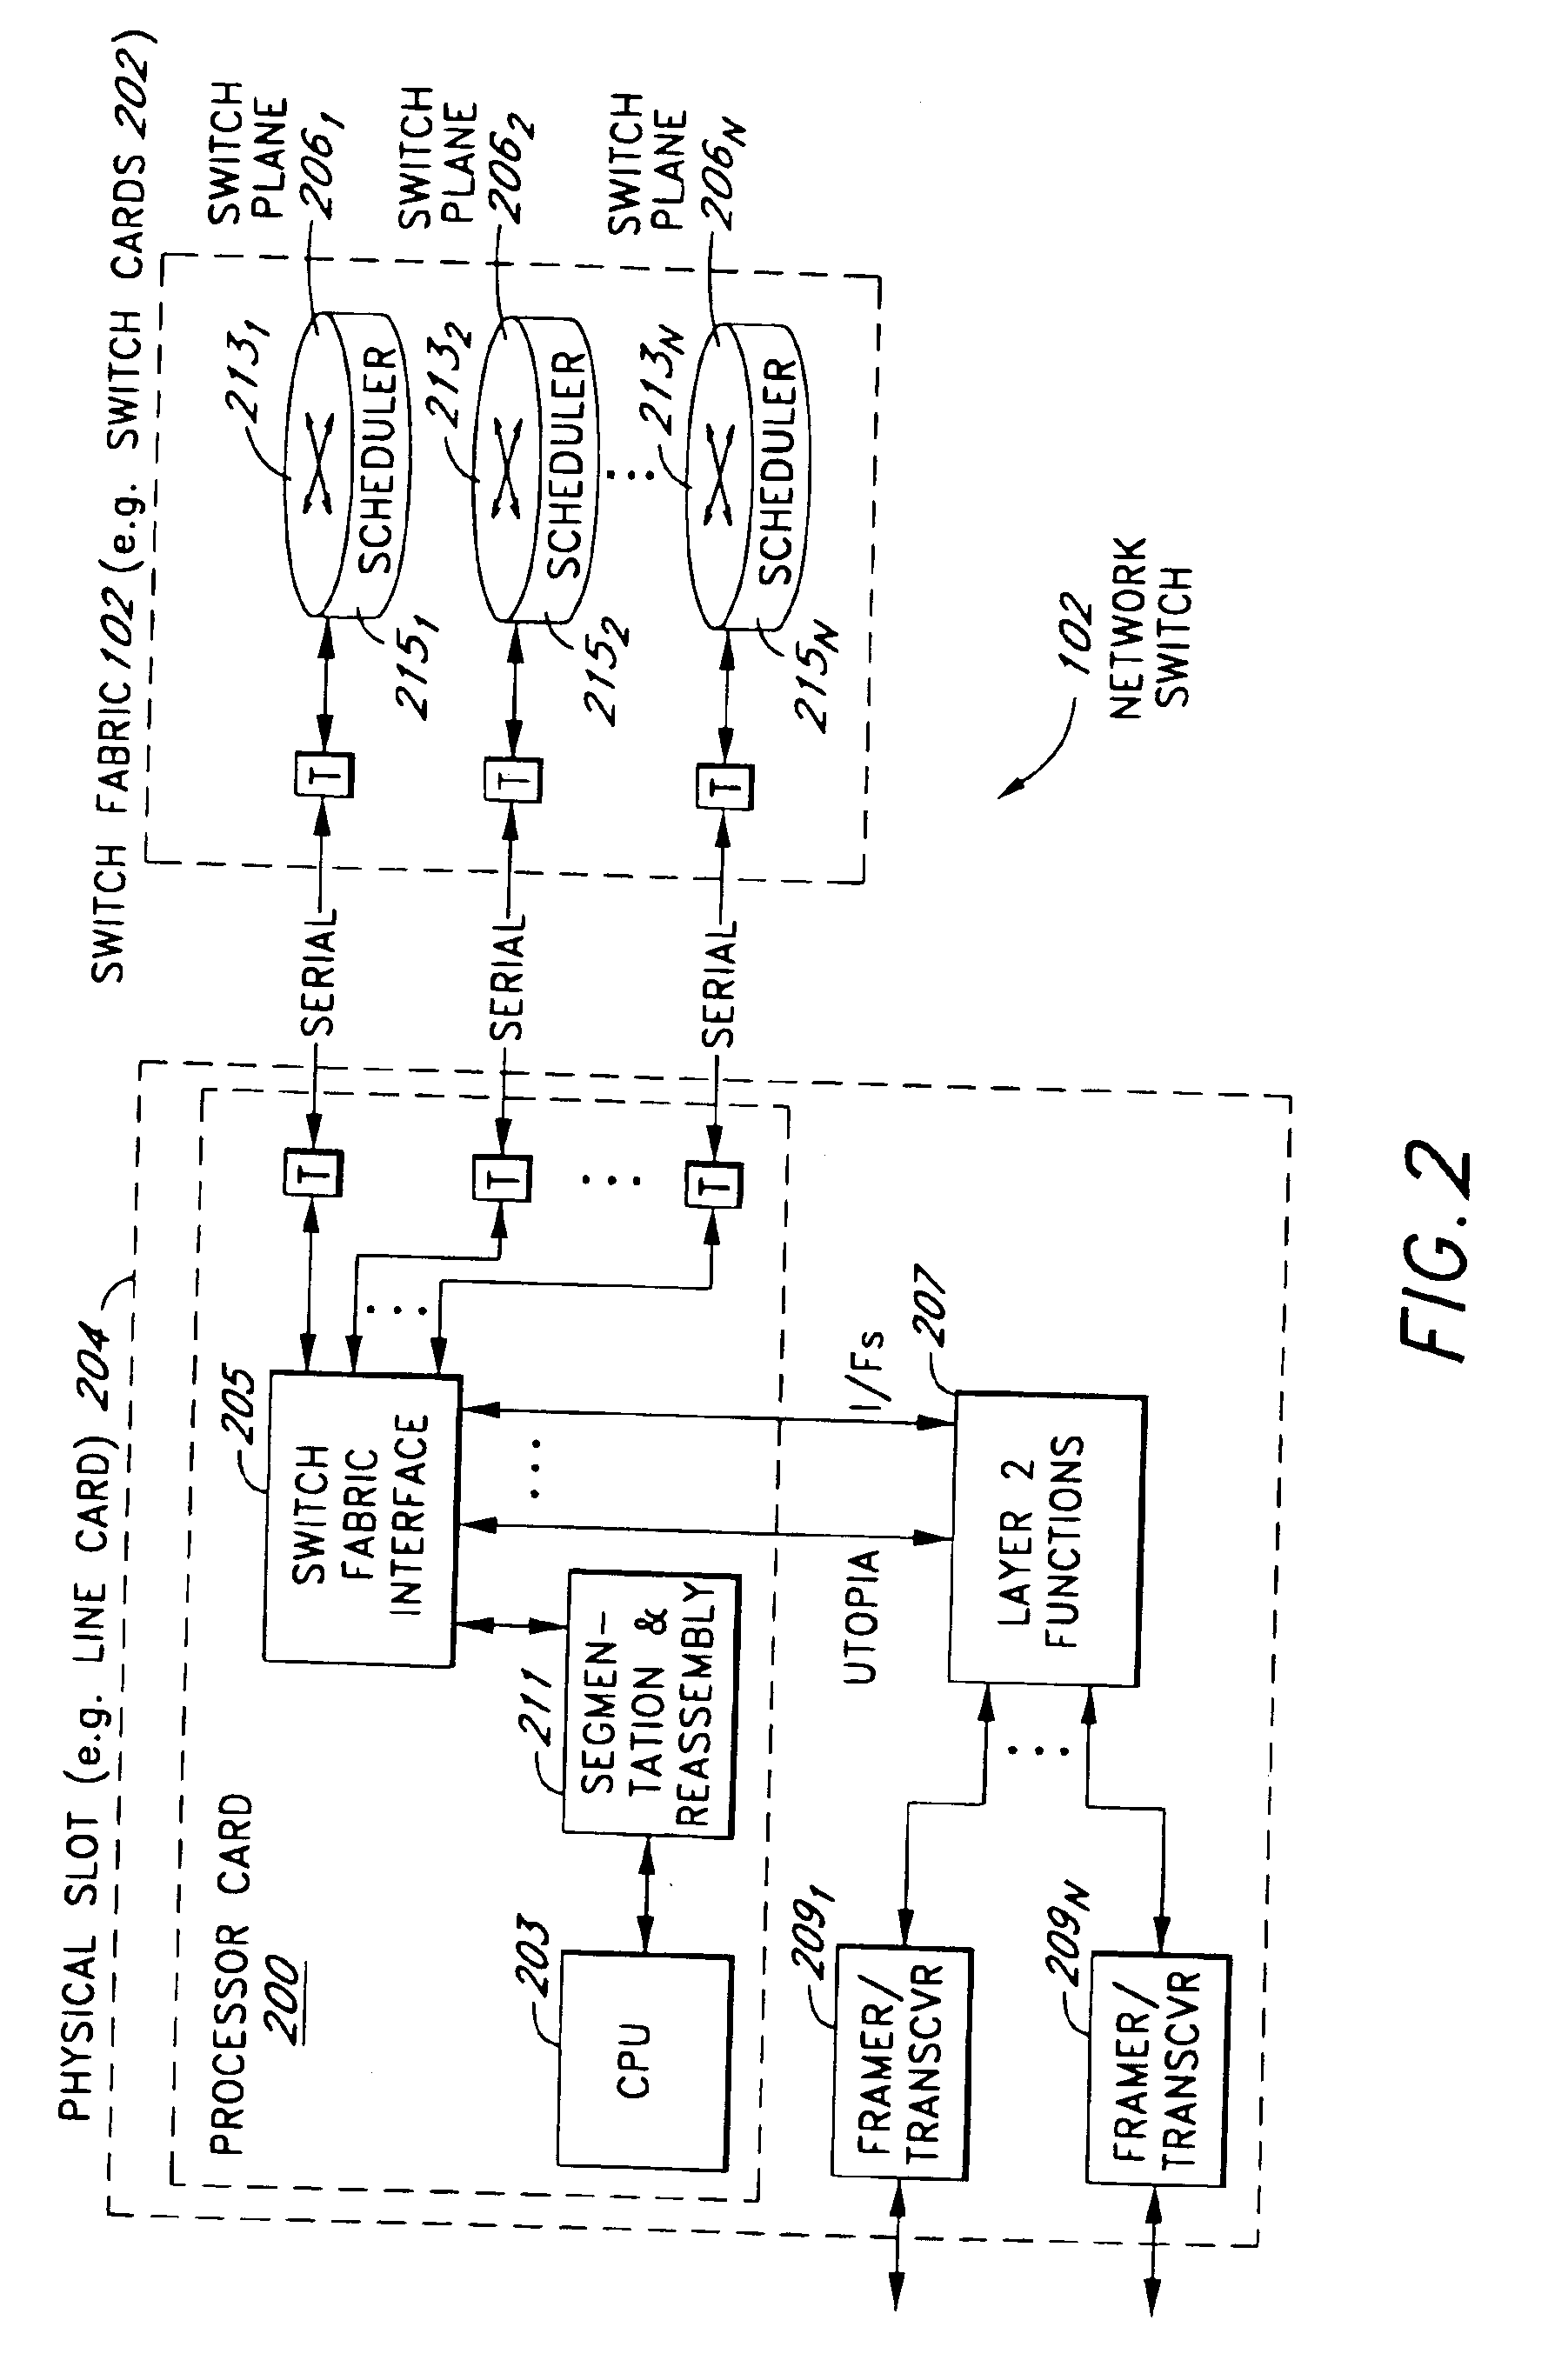 Method for implementing automatic protection switching (APS) using cell replication